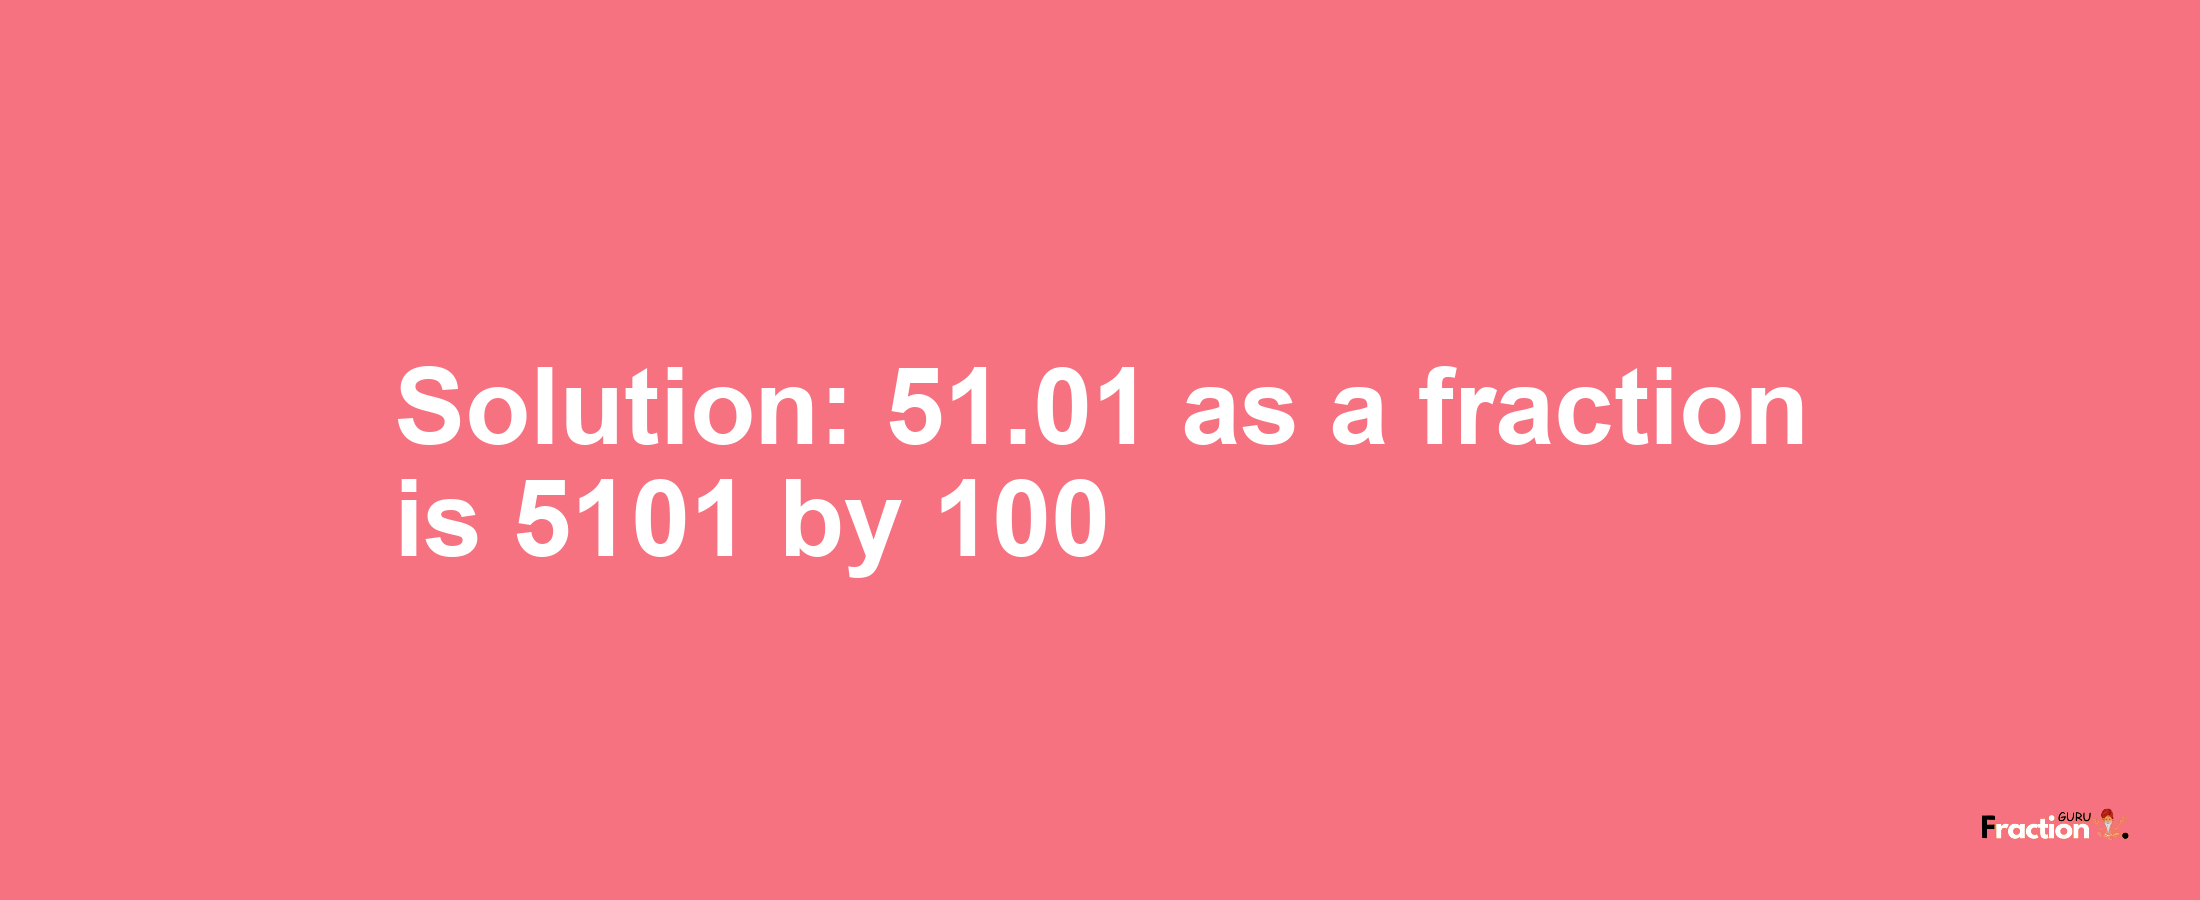 Solution:51.01 as a fraction is 5101/100